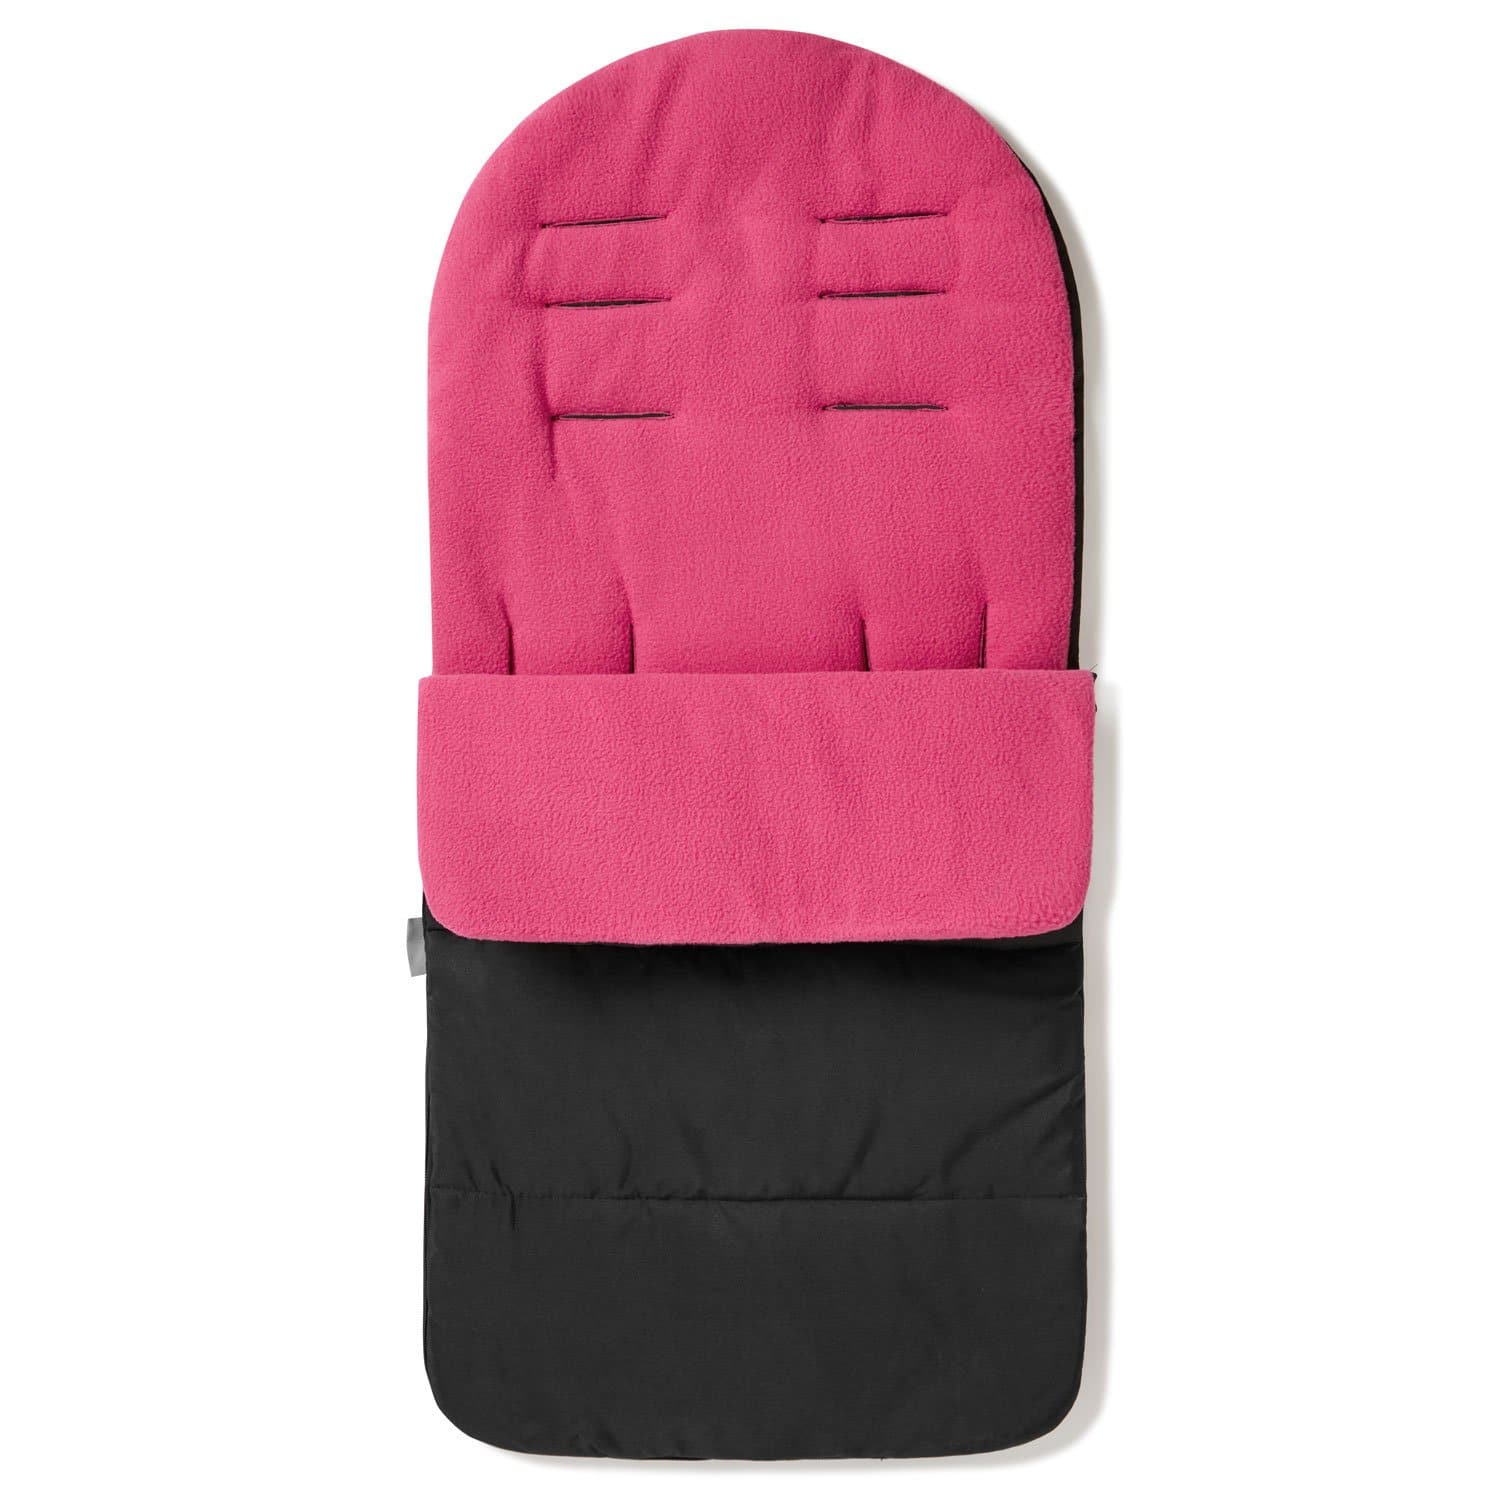 Premium Footmuff / Cosy Toes Compatible with Recaro - Pink Rose / Fits All Models | For Your Little One